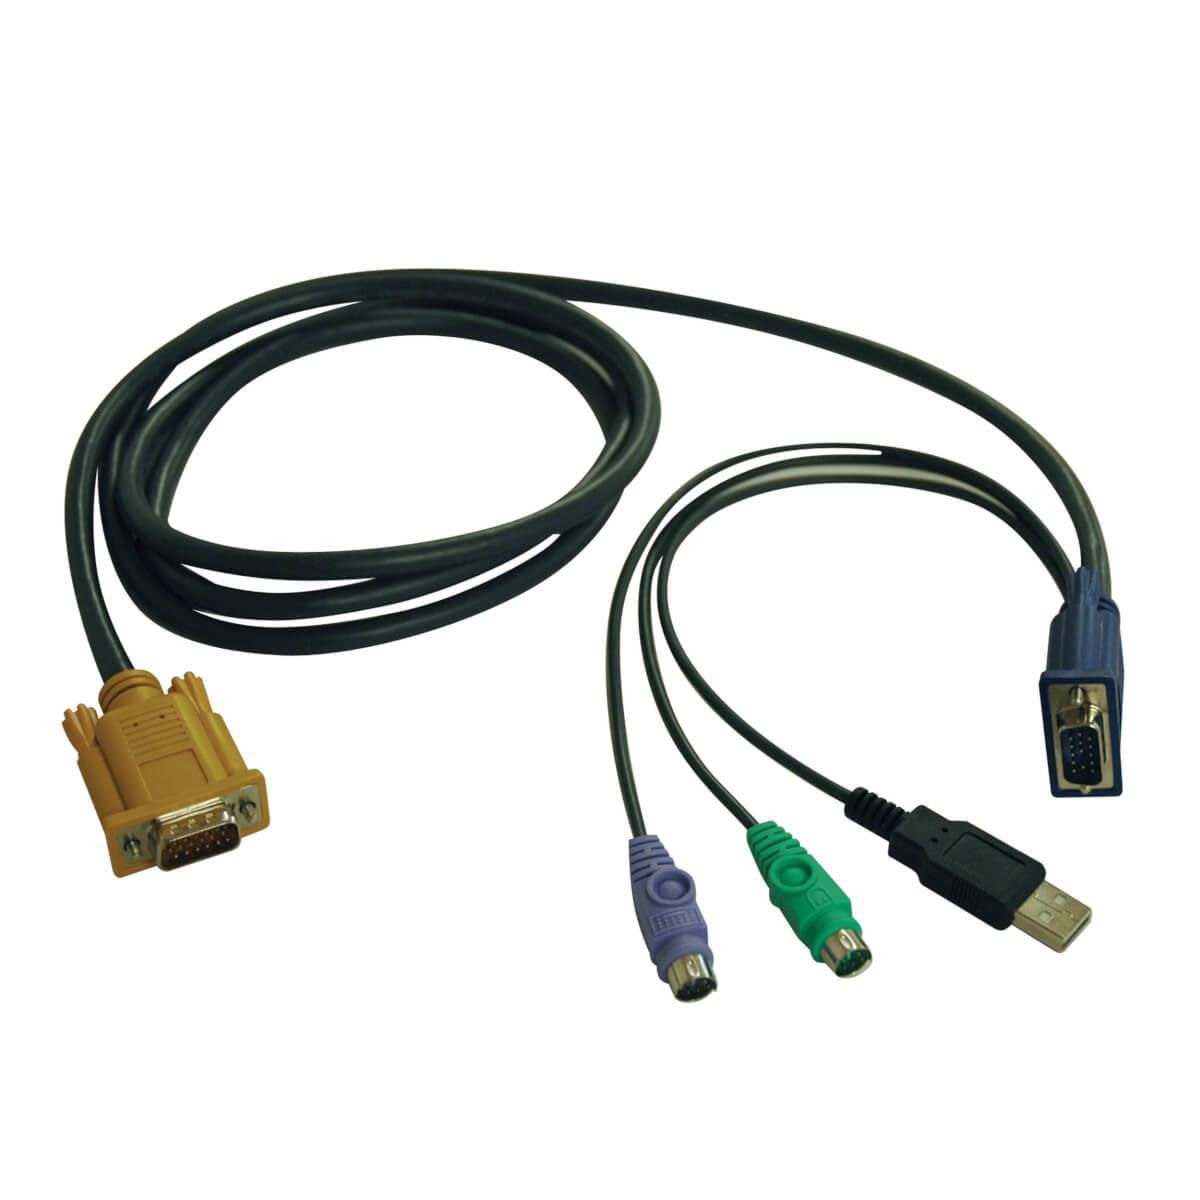 10FT USB / PS2 CABLE KIT